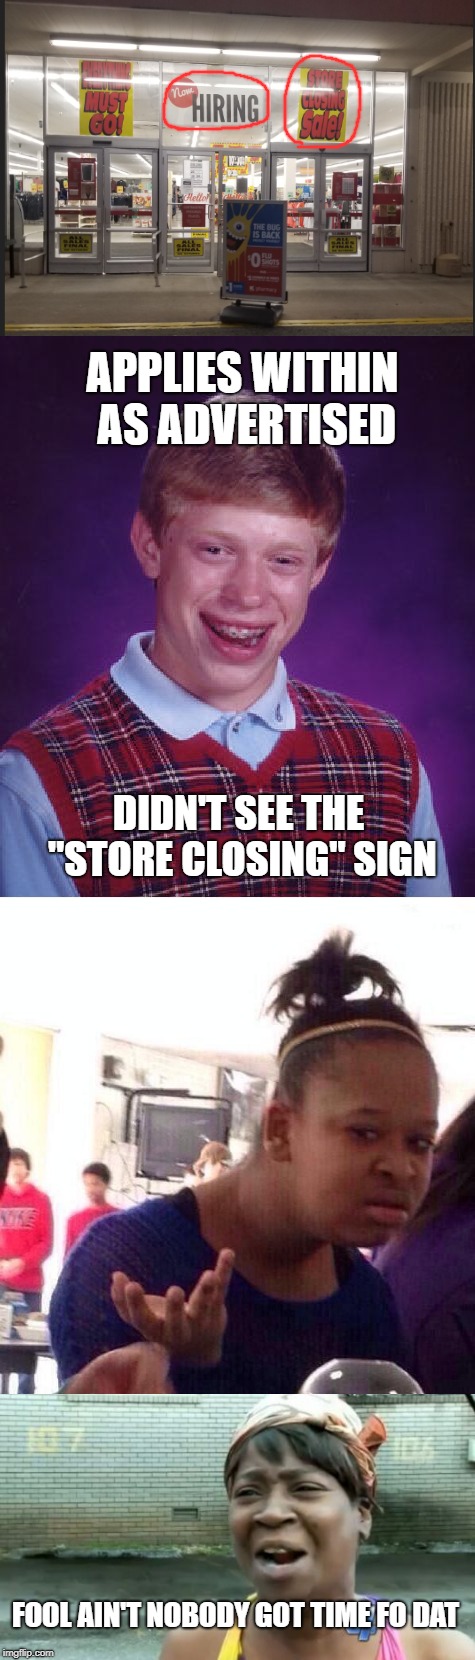 Now Hiring/Store Closing | APPLIES WITHIN AS ADVERTISED; DIDN'T SEE THE "STORE CLOSING" SIGN; FOOL AIN'T NOBODY GOT TIME FO DAT | image tagged in wtf,bad luck brian,wat | made w/ Imgflip meme maker